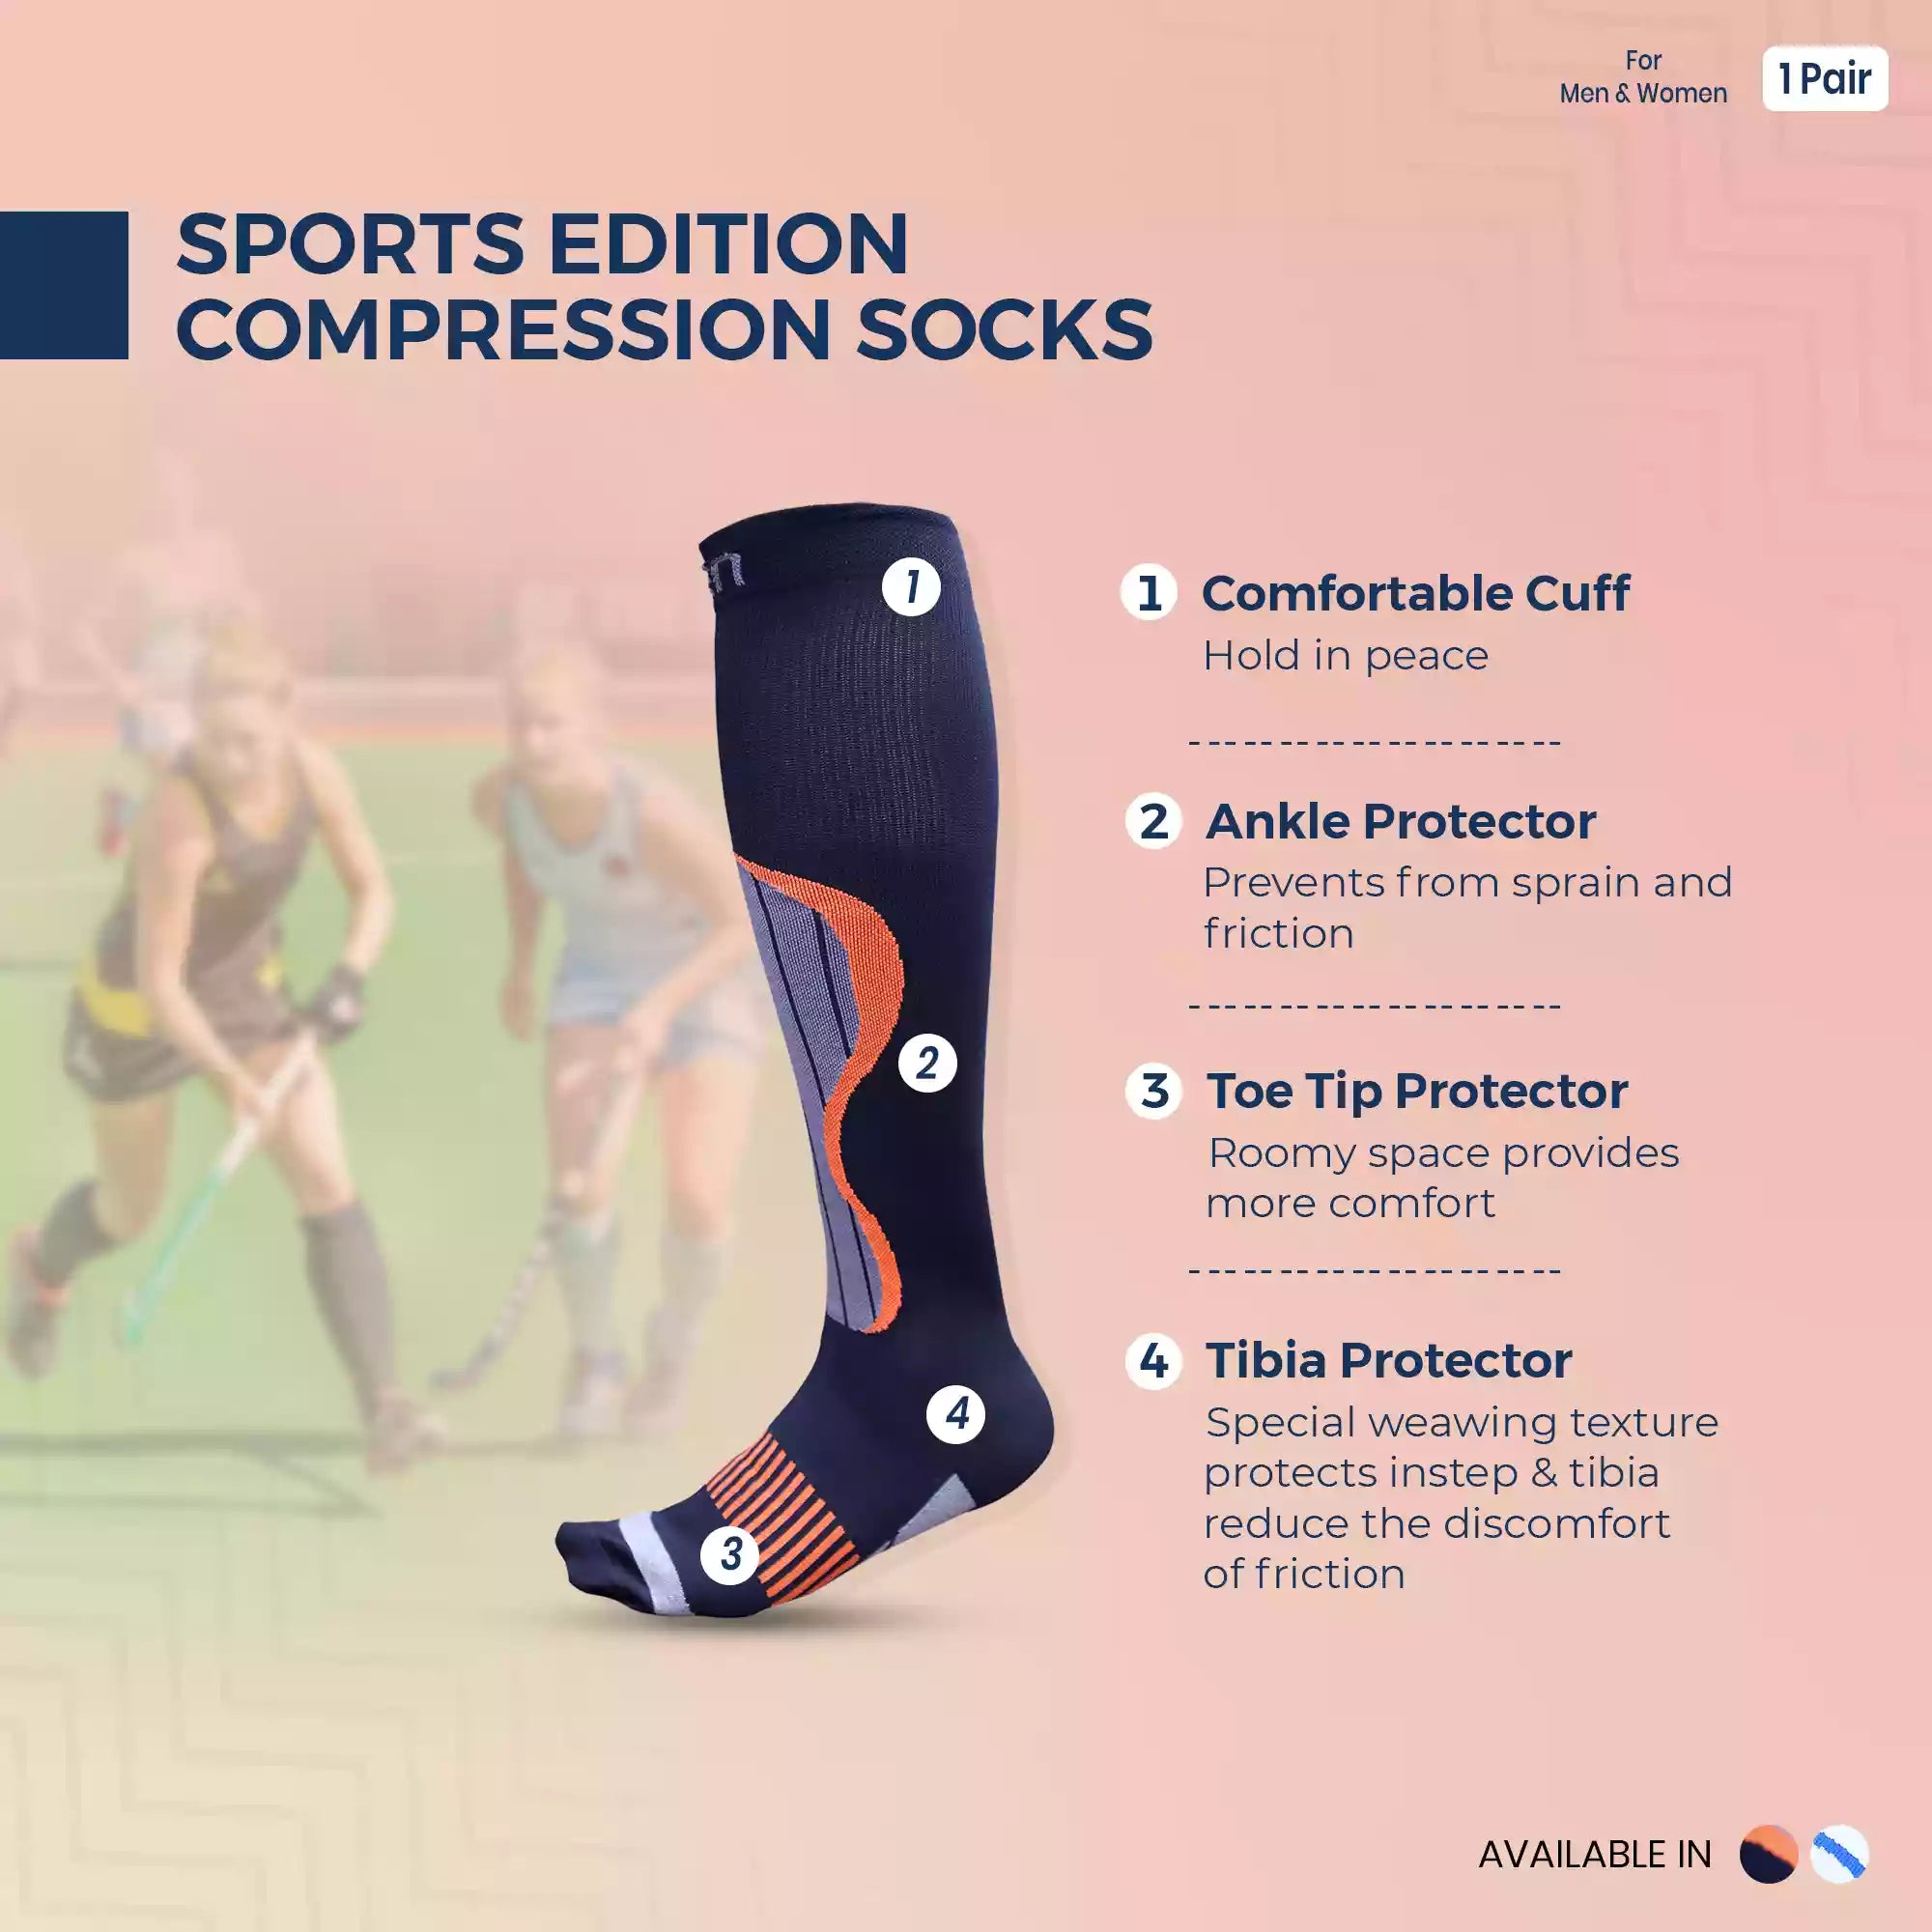 What are the Benefits of Compression Socks for Sports?